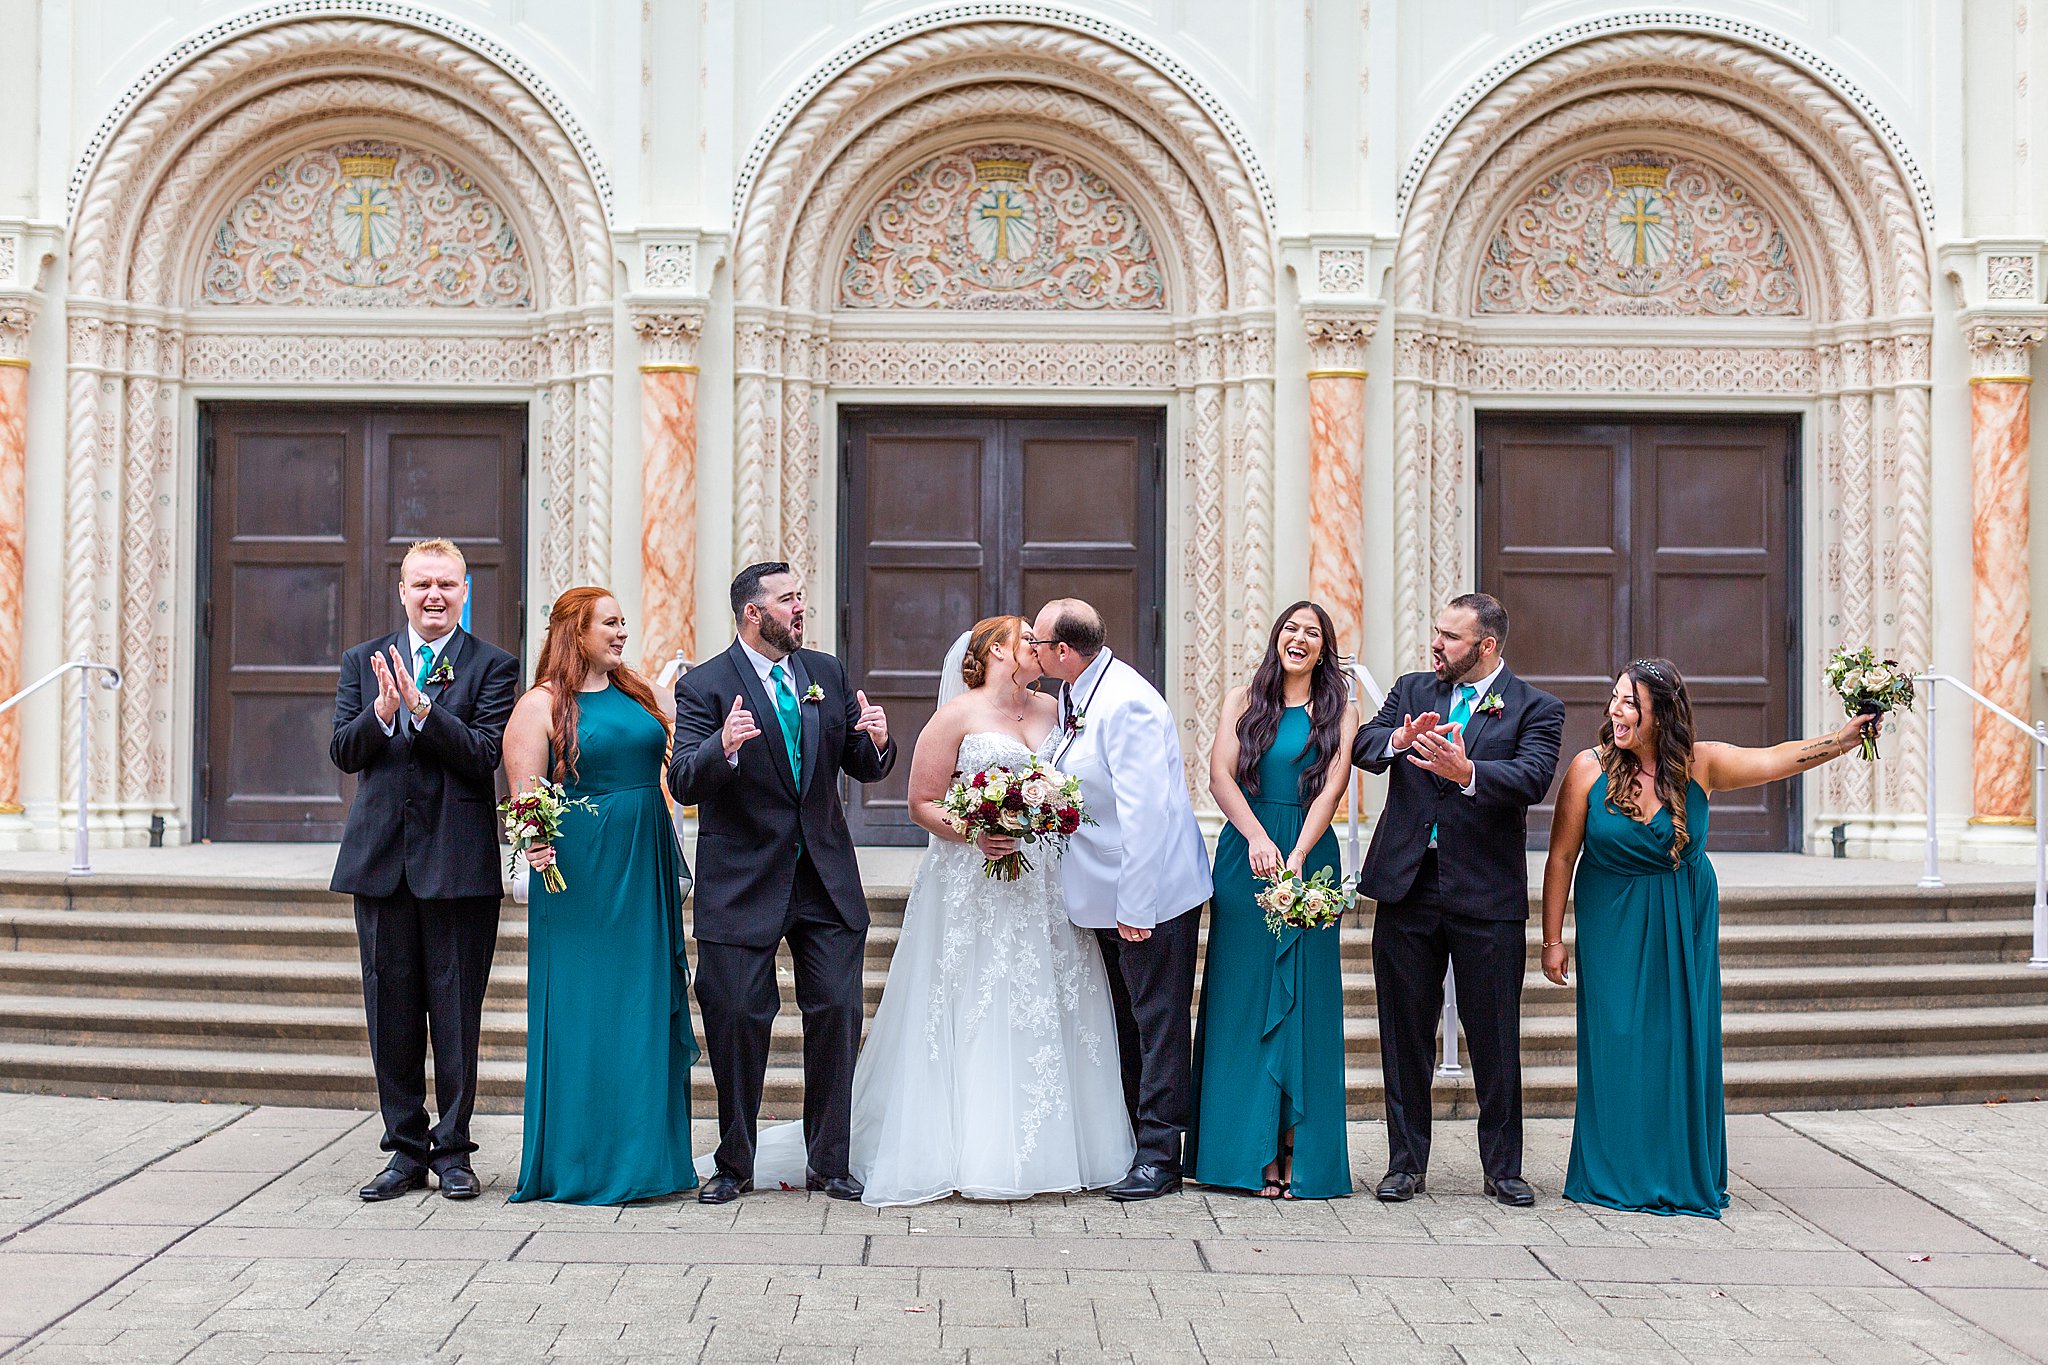 bride and groom with groomsmen and bridesmaids in front of church